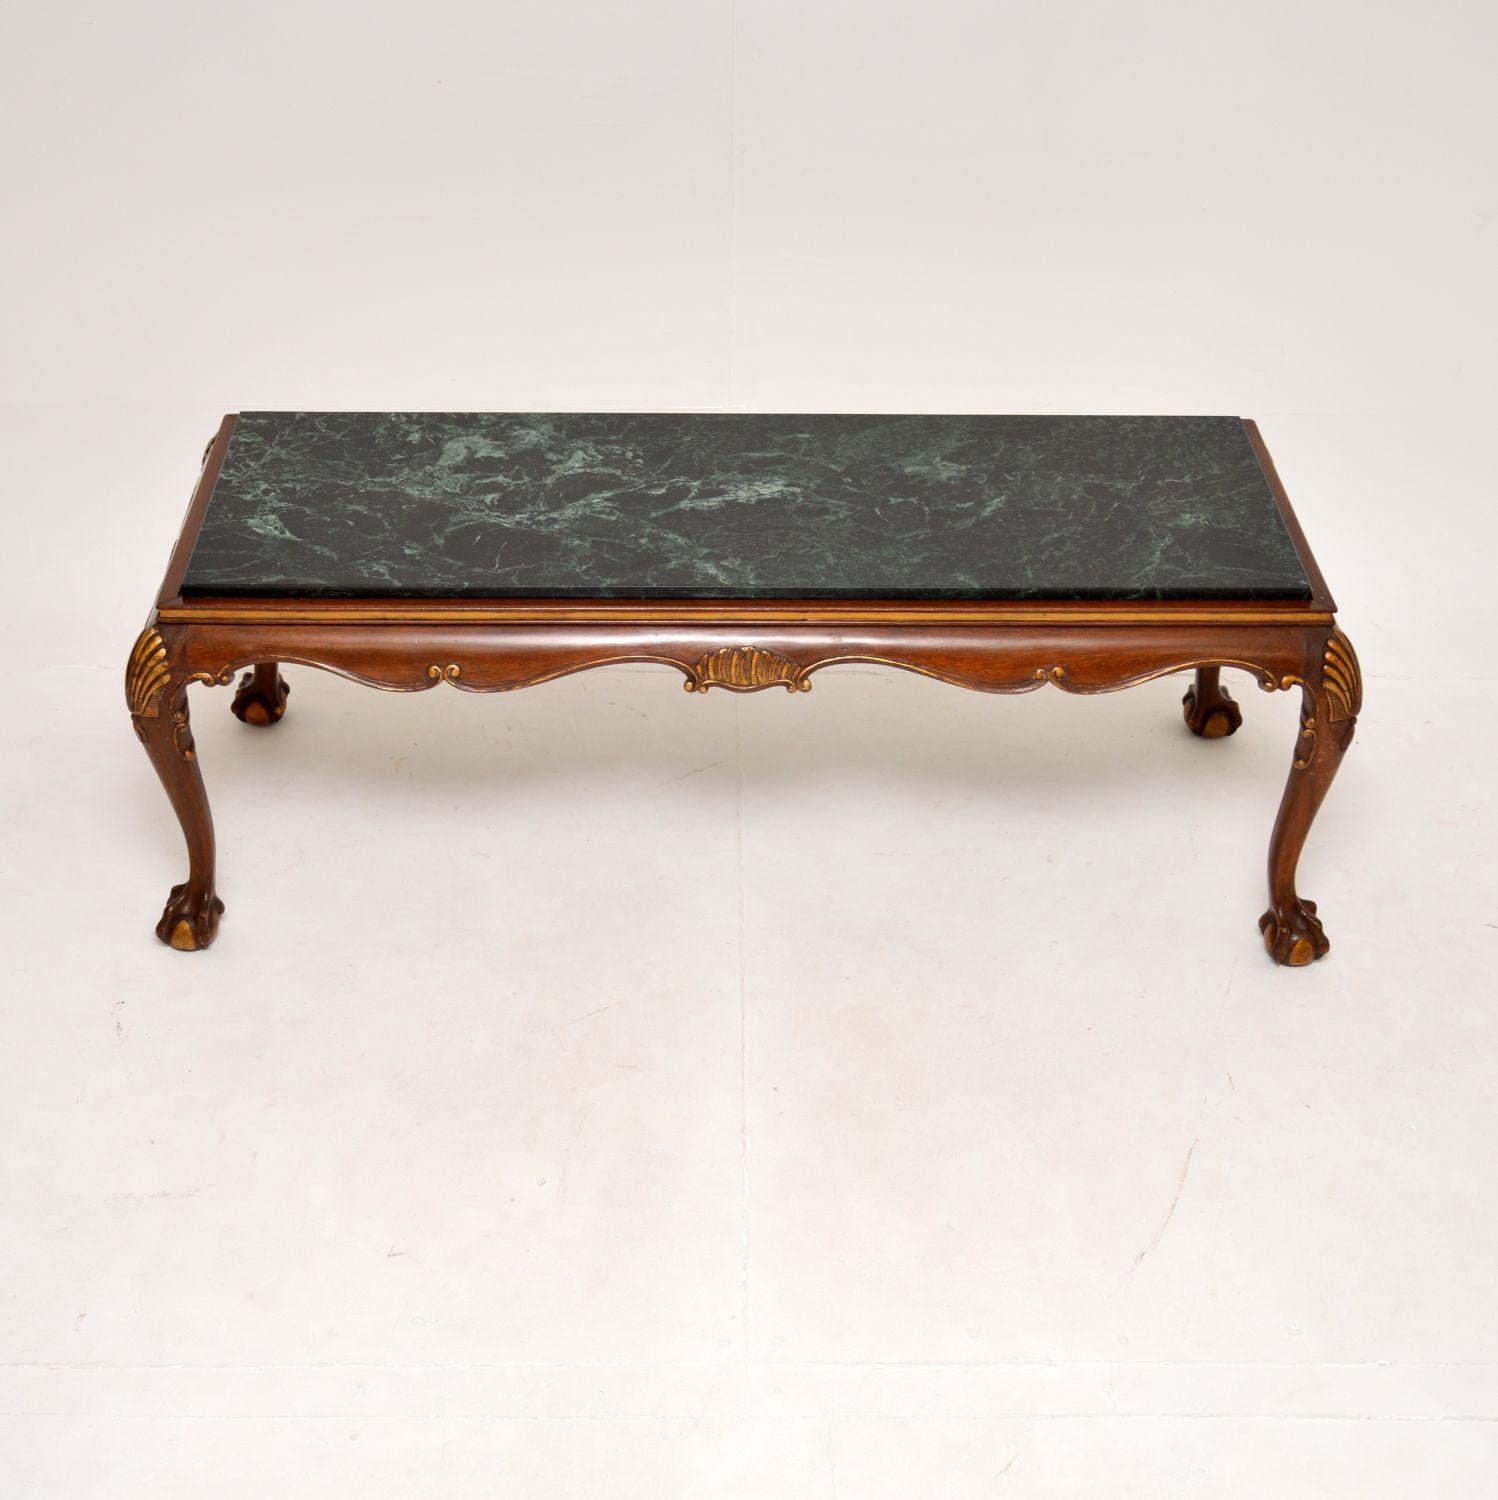 A fantastic antique marble top coffee table in the Chippendale style. This was made in England, it dates from around the 1920-30’s.

It is of superb quality, the frame is beautifully designed with shell carving at the knees, claw and ball feet, and